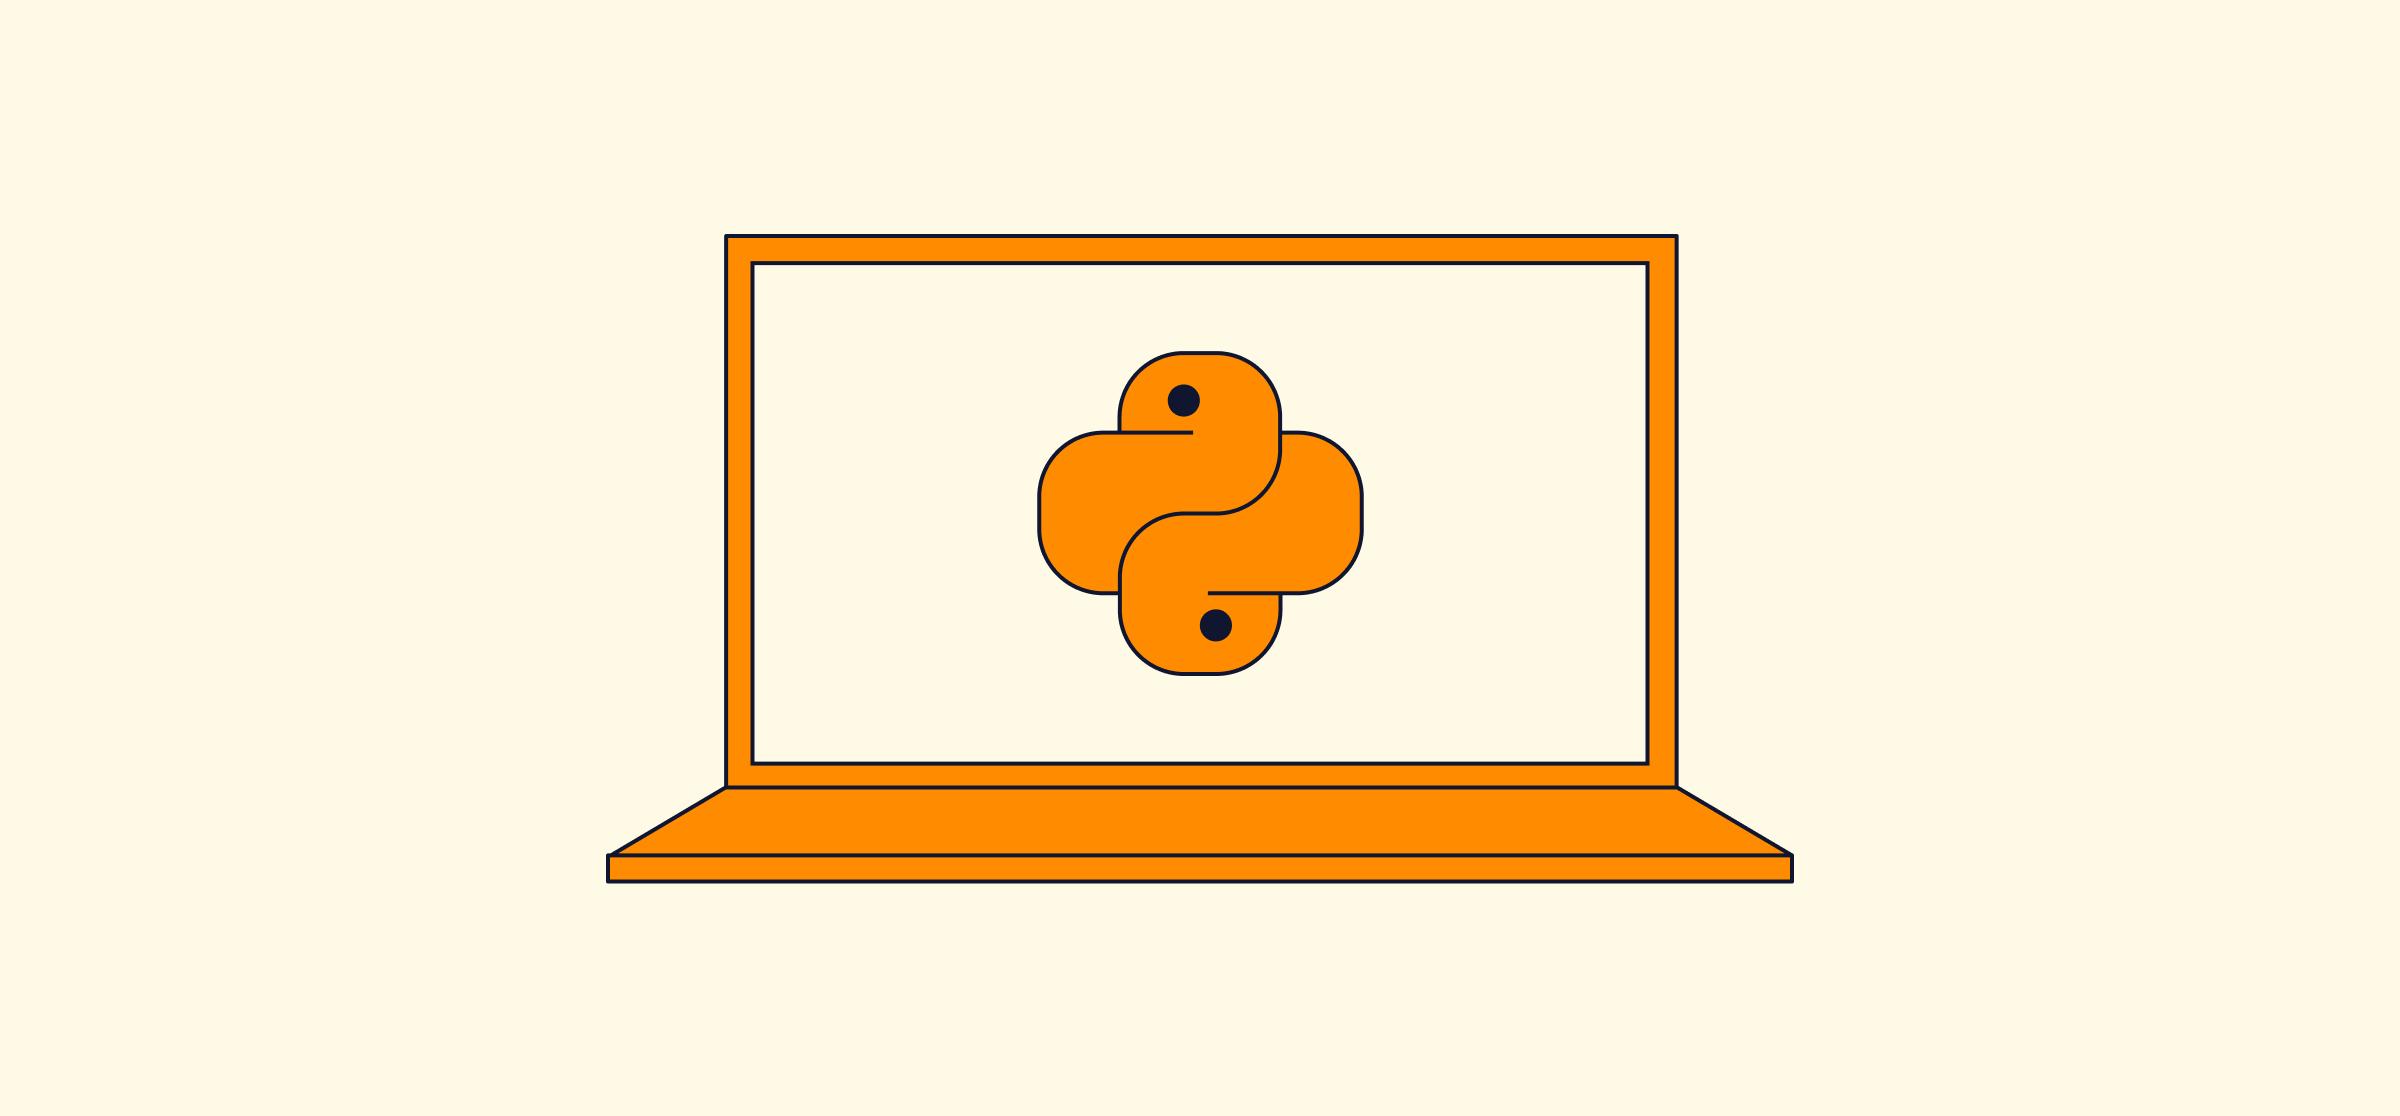 What is Python Used For? [Video]